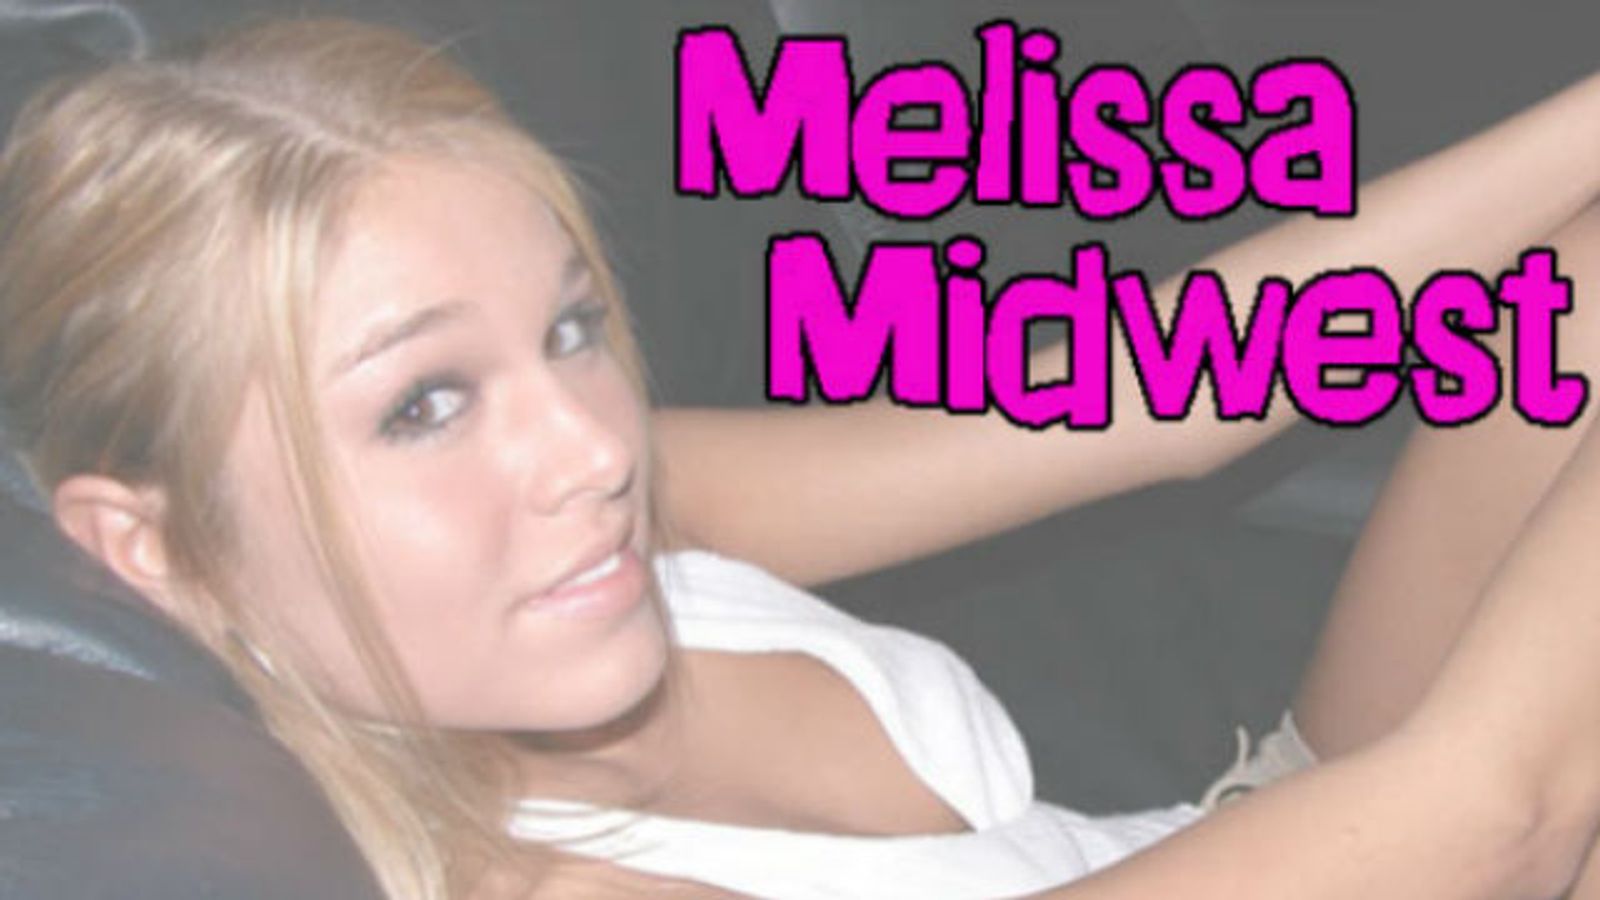 Melissa midwest images